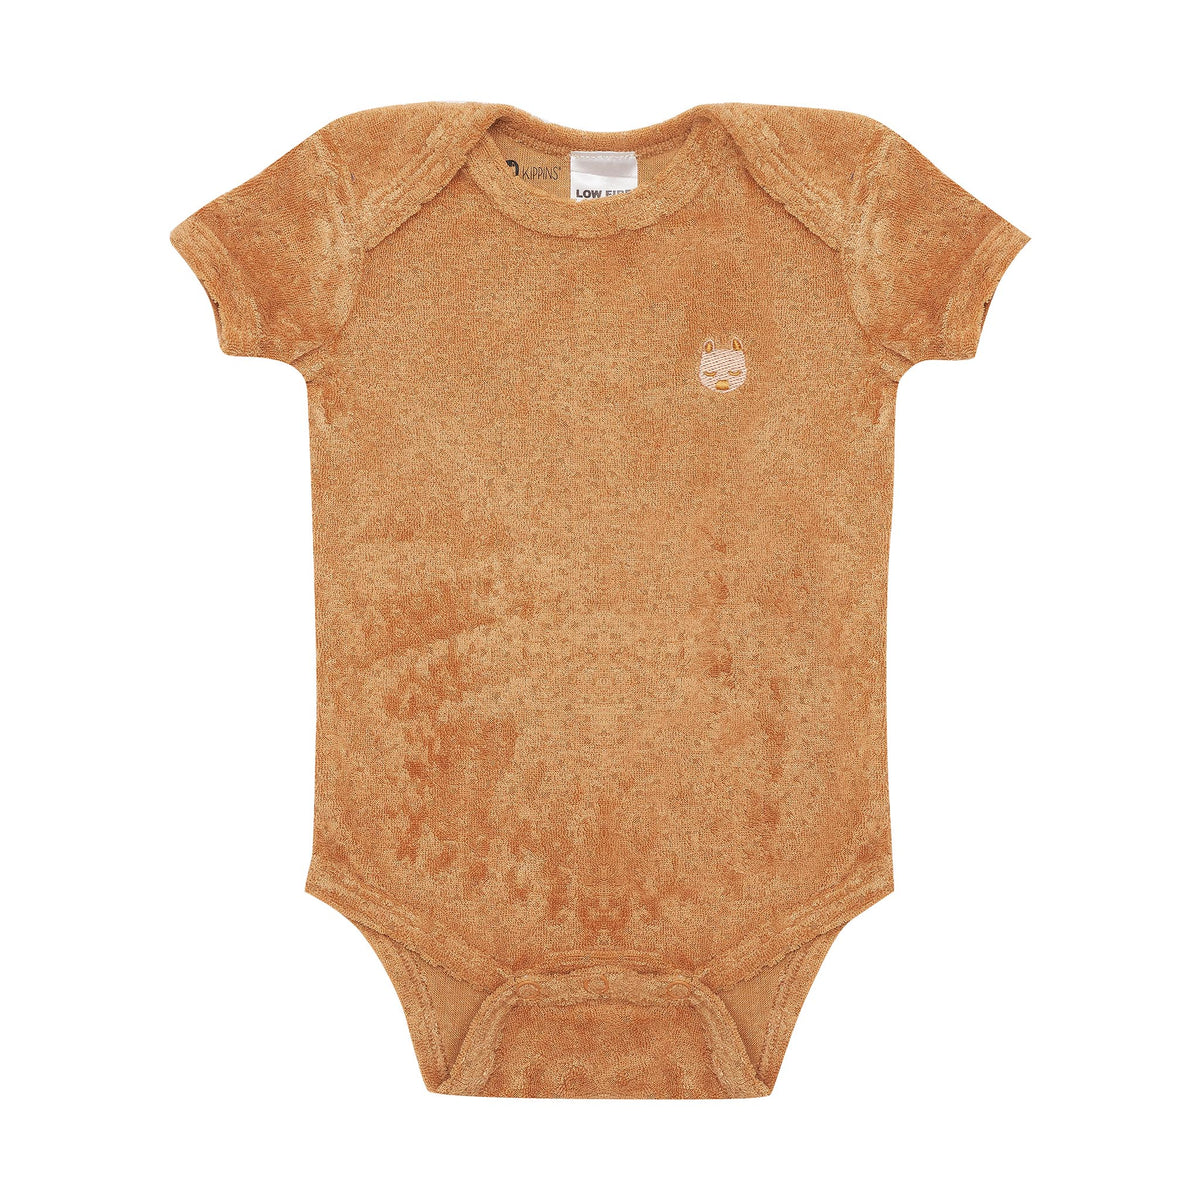 Bamboo Terry Bodysuit - Biscuit (7505889329401)